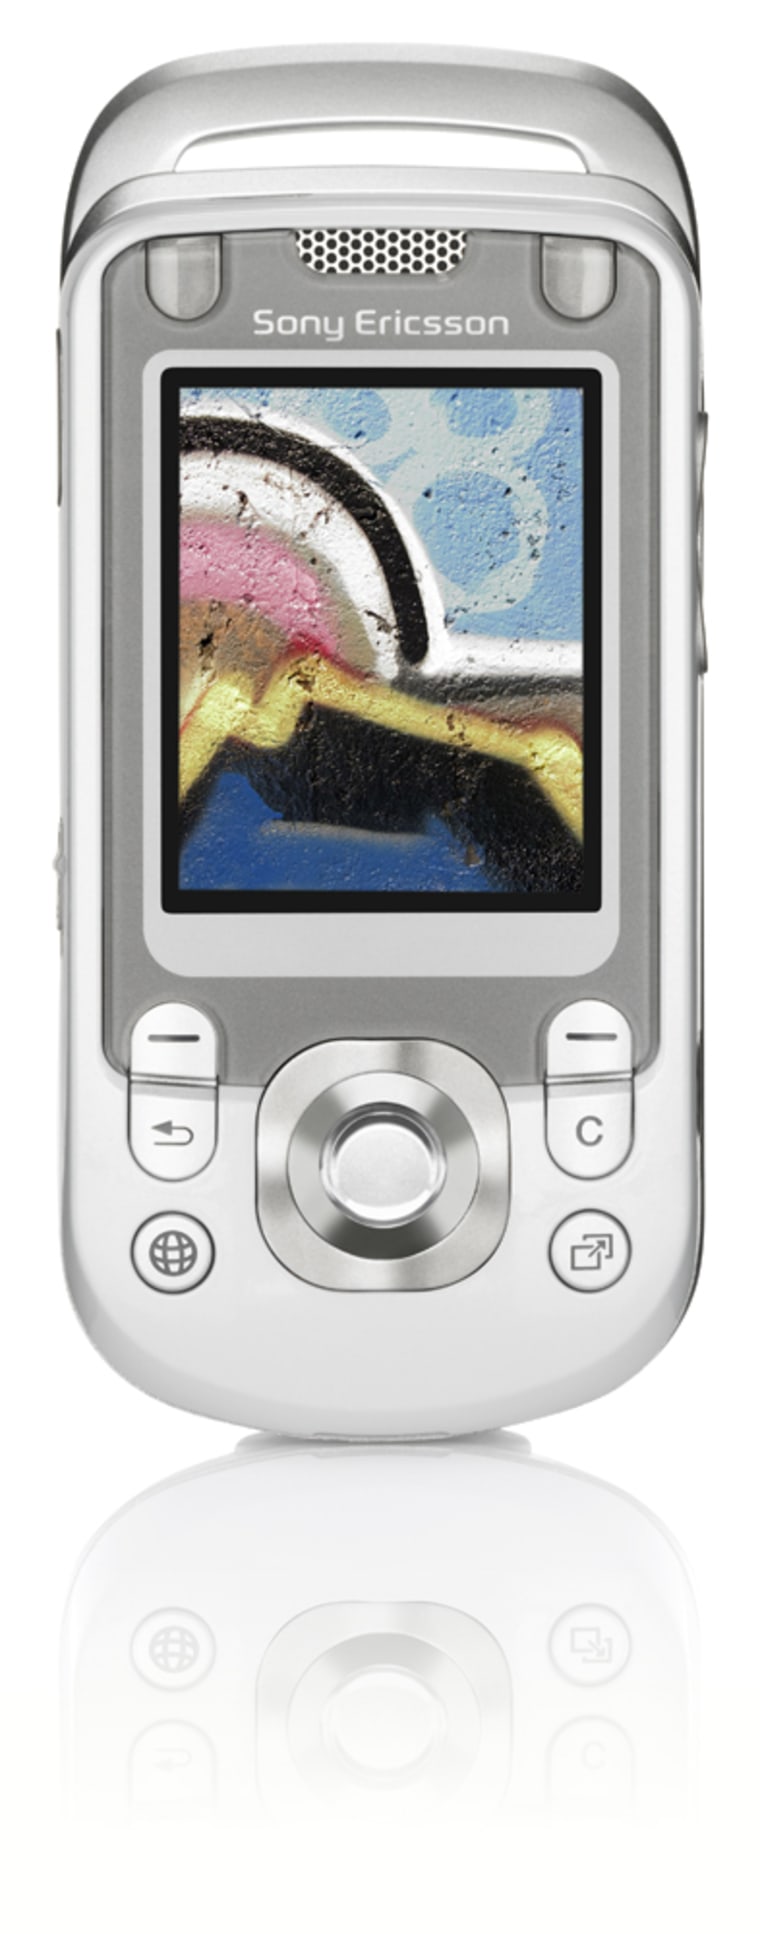 Sony Ericsson's S600 phone includes a camera and advanced gaming features.